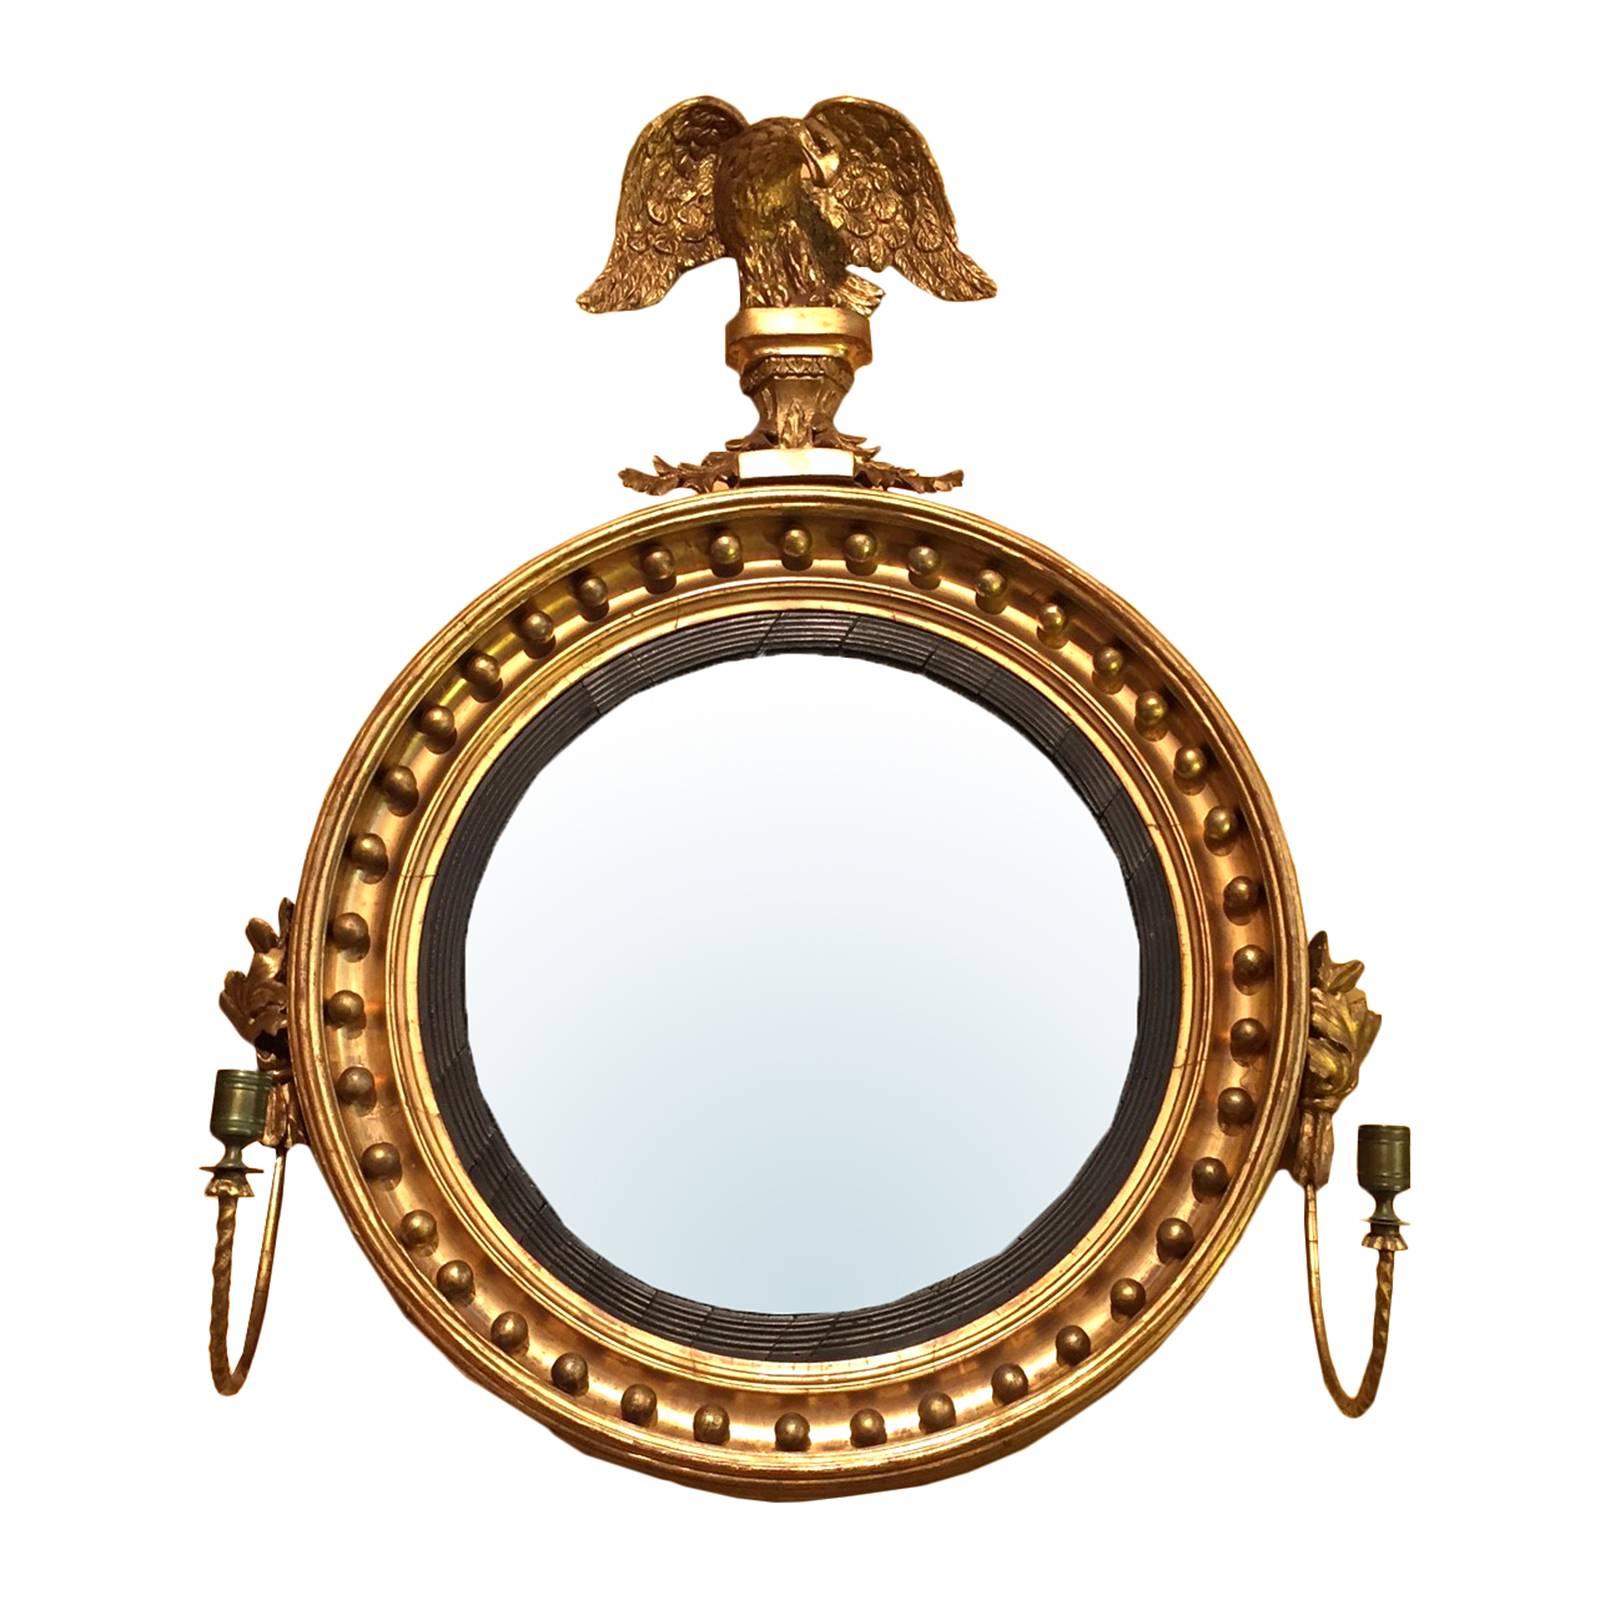 19th Century American Giltwood Convex Mirror with Eagle and Sconce